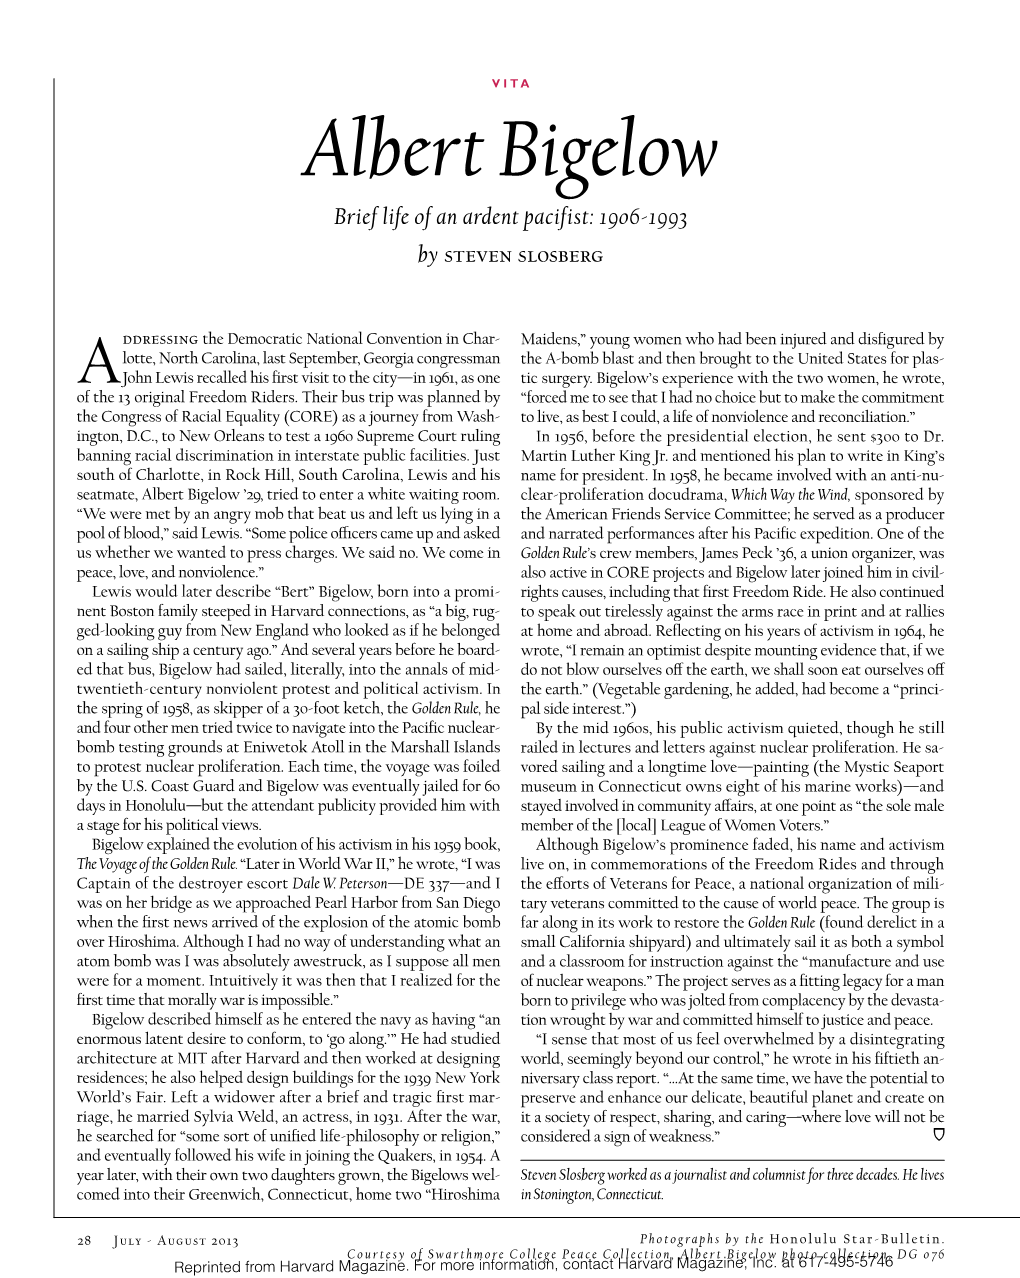 Albert Bigelow Brief Life of an Ardent Pacifist: 1906-1993 by Steven Slosberg